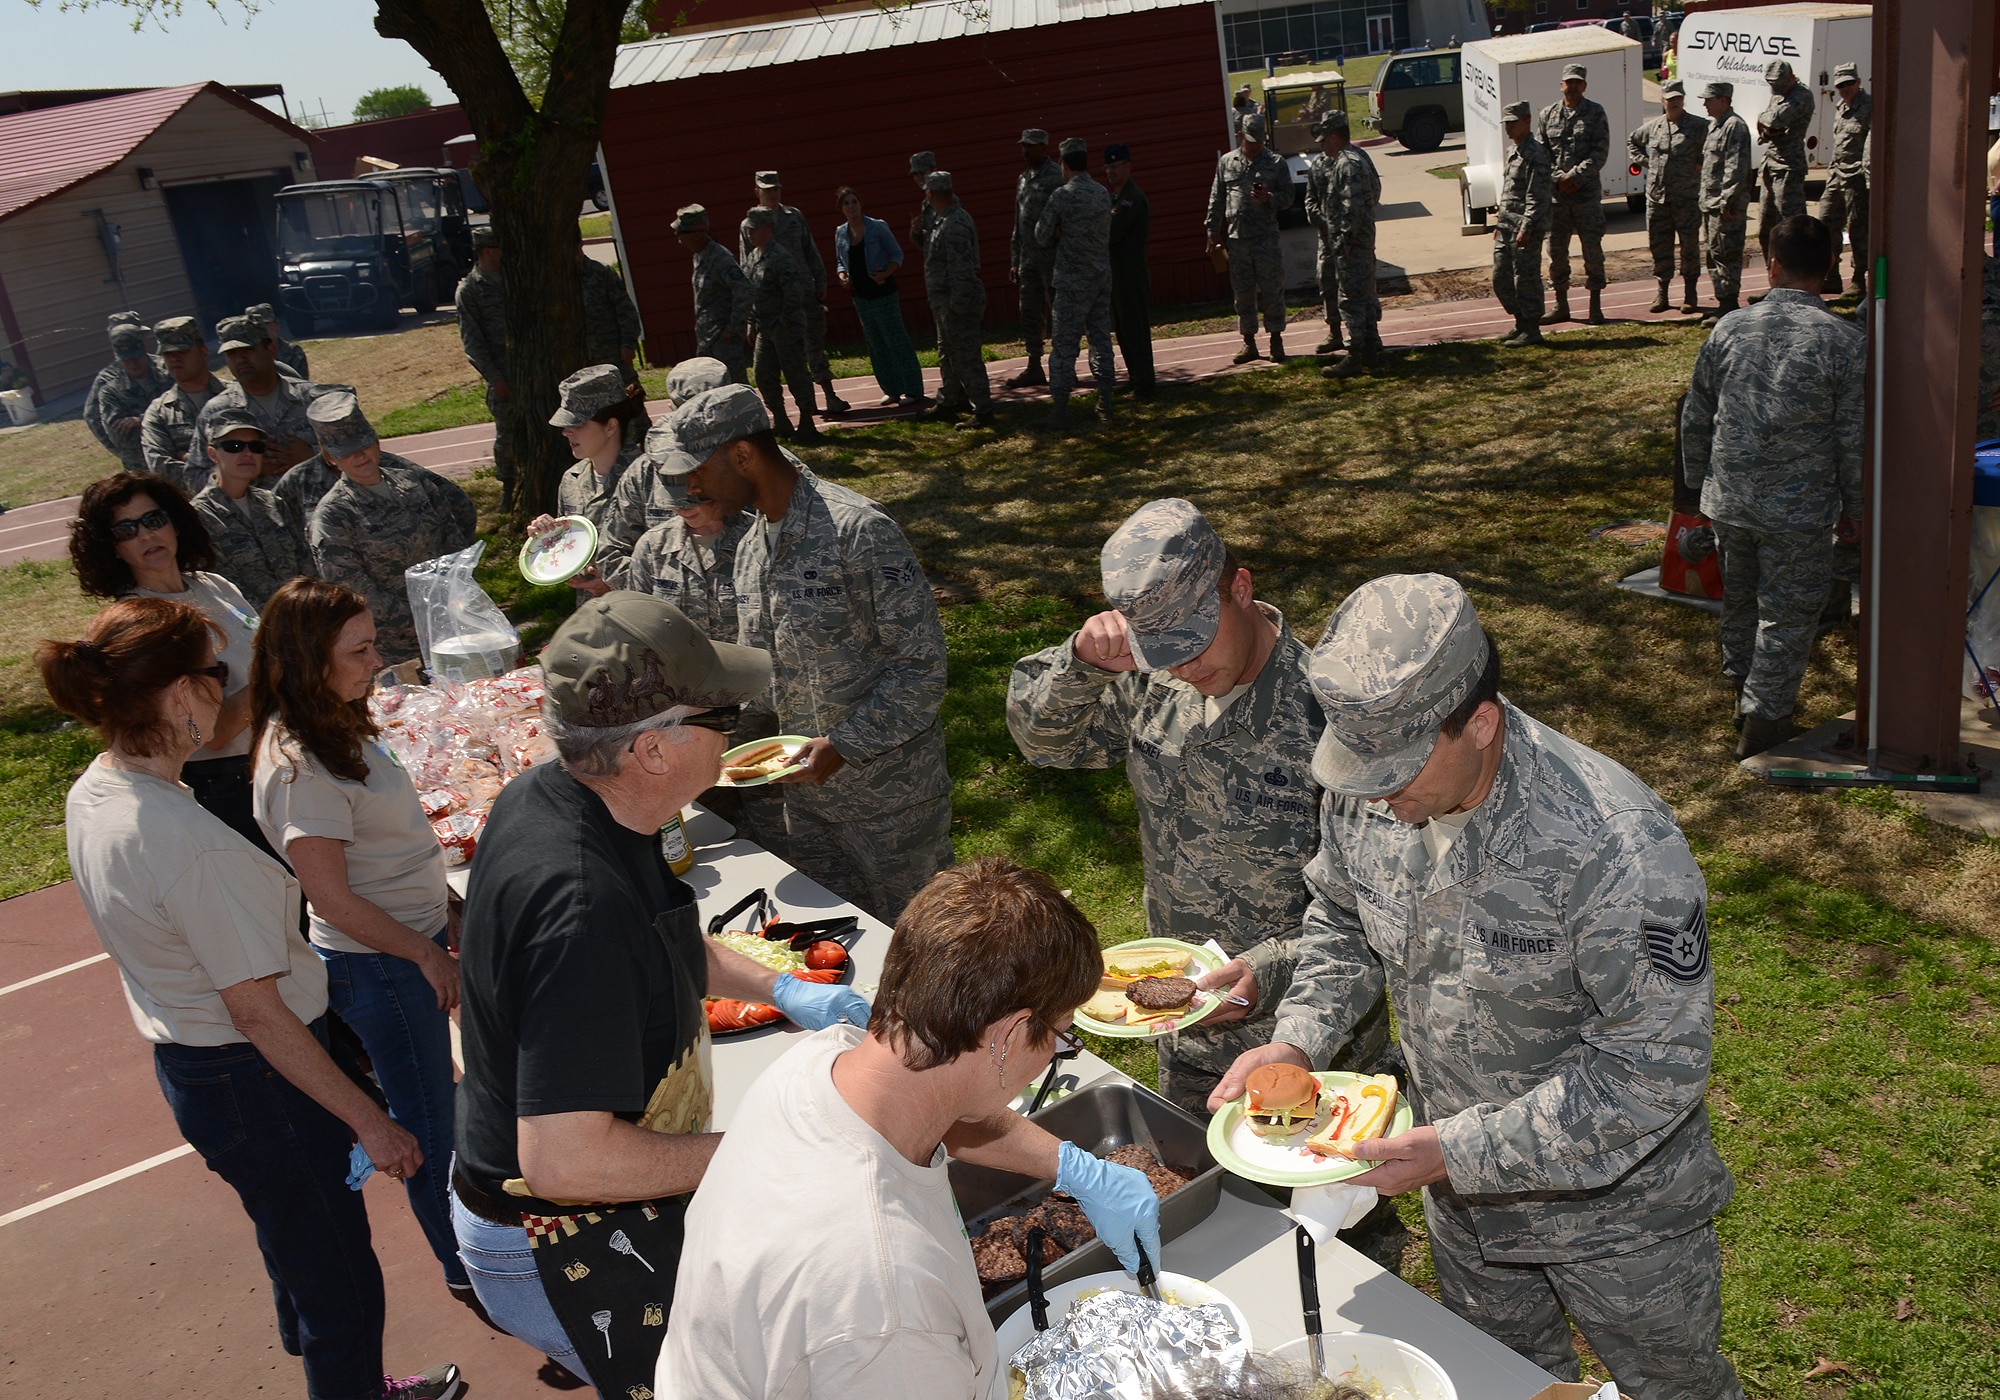 Volunteers serve members of the 138th Fighter Wing during an Earth Day celebration at the 138th FW, 22 April 2014.  The 138th FW Environmental Management office organized a cookout and other green activities to celebrate the day at the Tulsa Air National Guard base, Tulsa Okla.  (U.S. National Guard photo by Senior Master Sgt.  Preston L. Chasteen/Released)